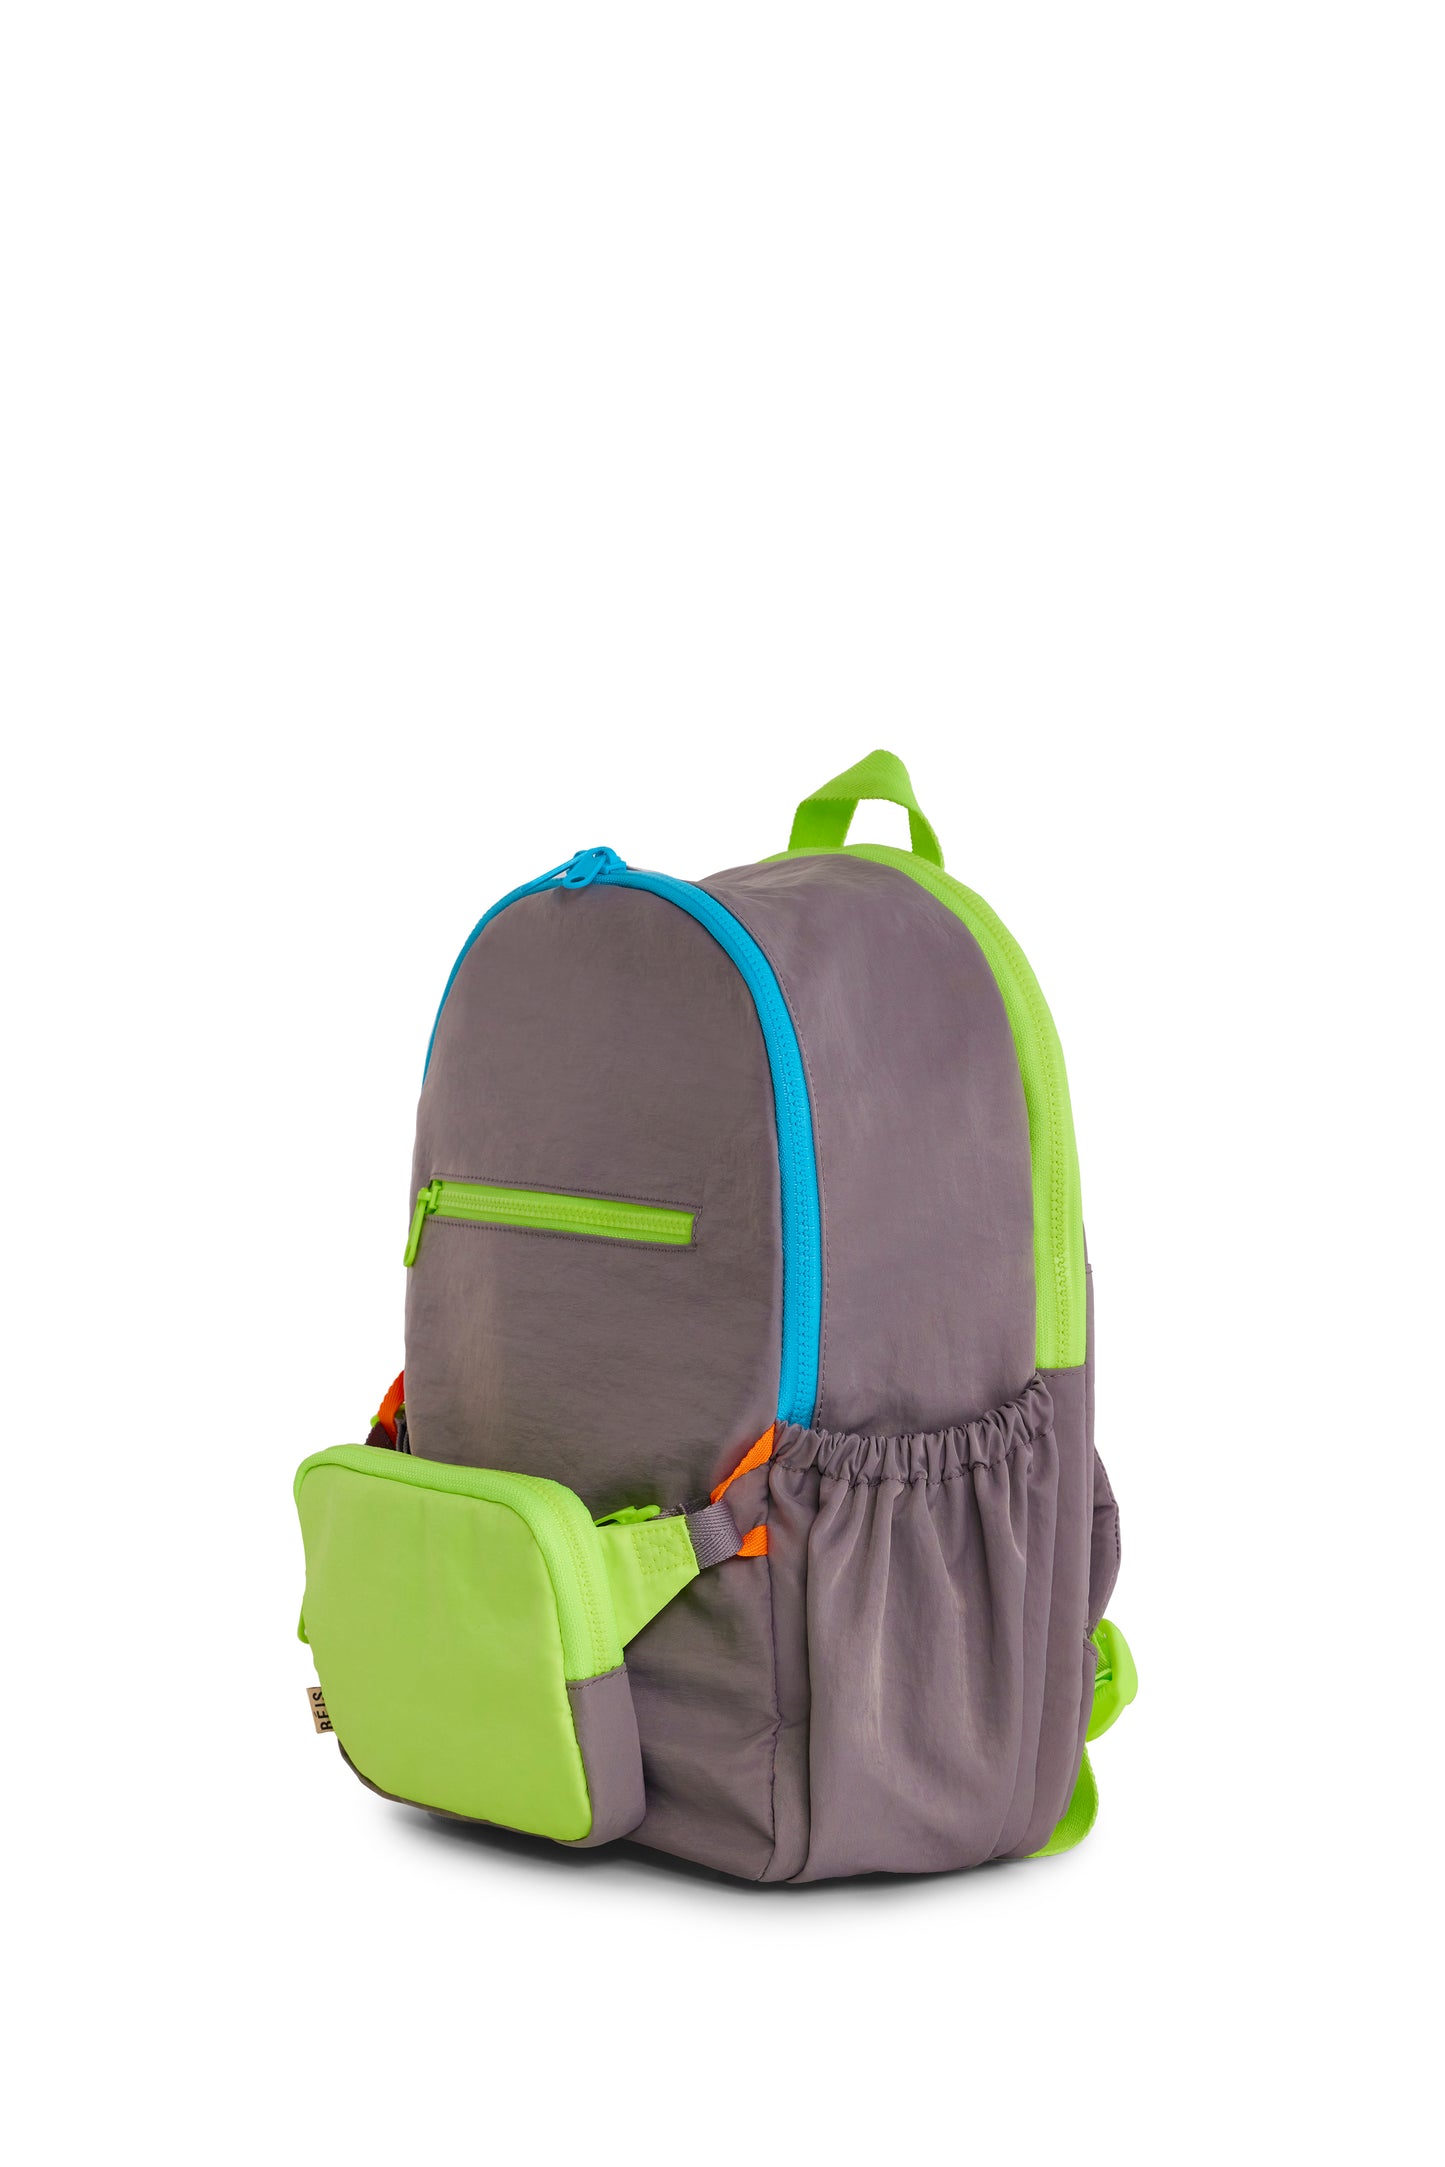 The Kids Backpack in Grey